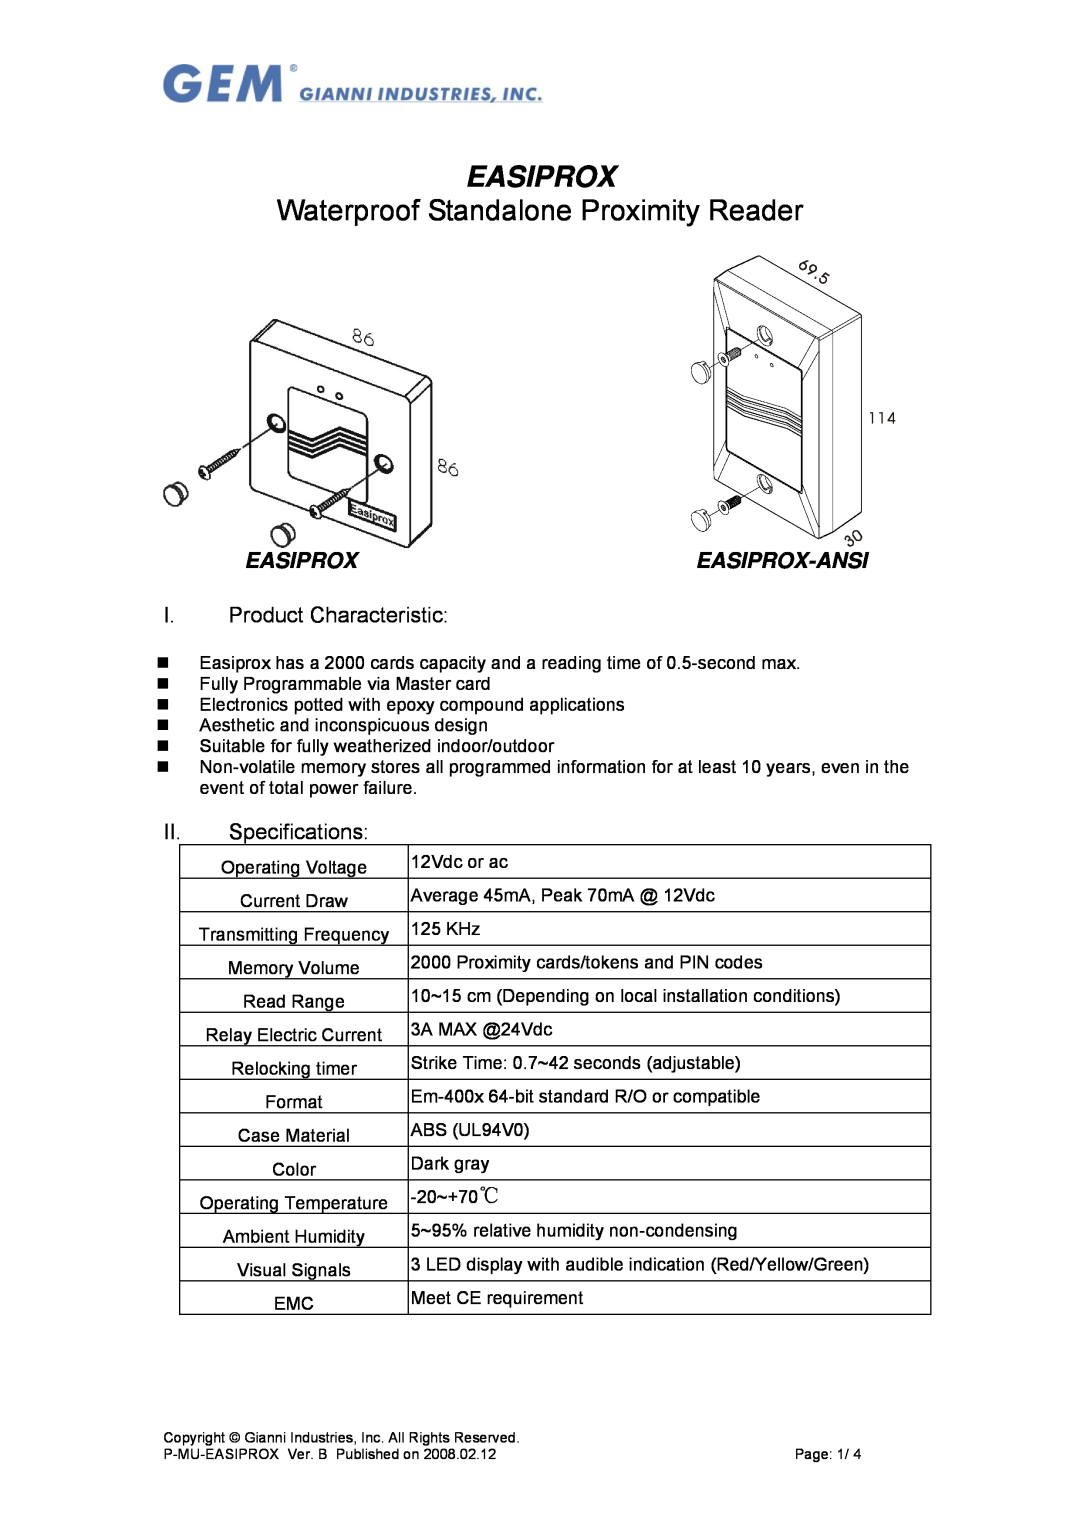 Gianni Industries P-MU-EASIPROX specifications I. Product Characteristic, II. Specifications, Easiprox-Ansi 